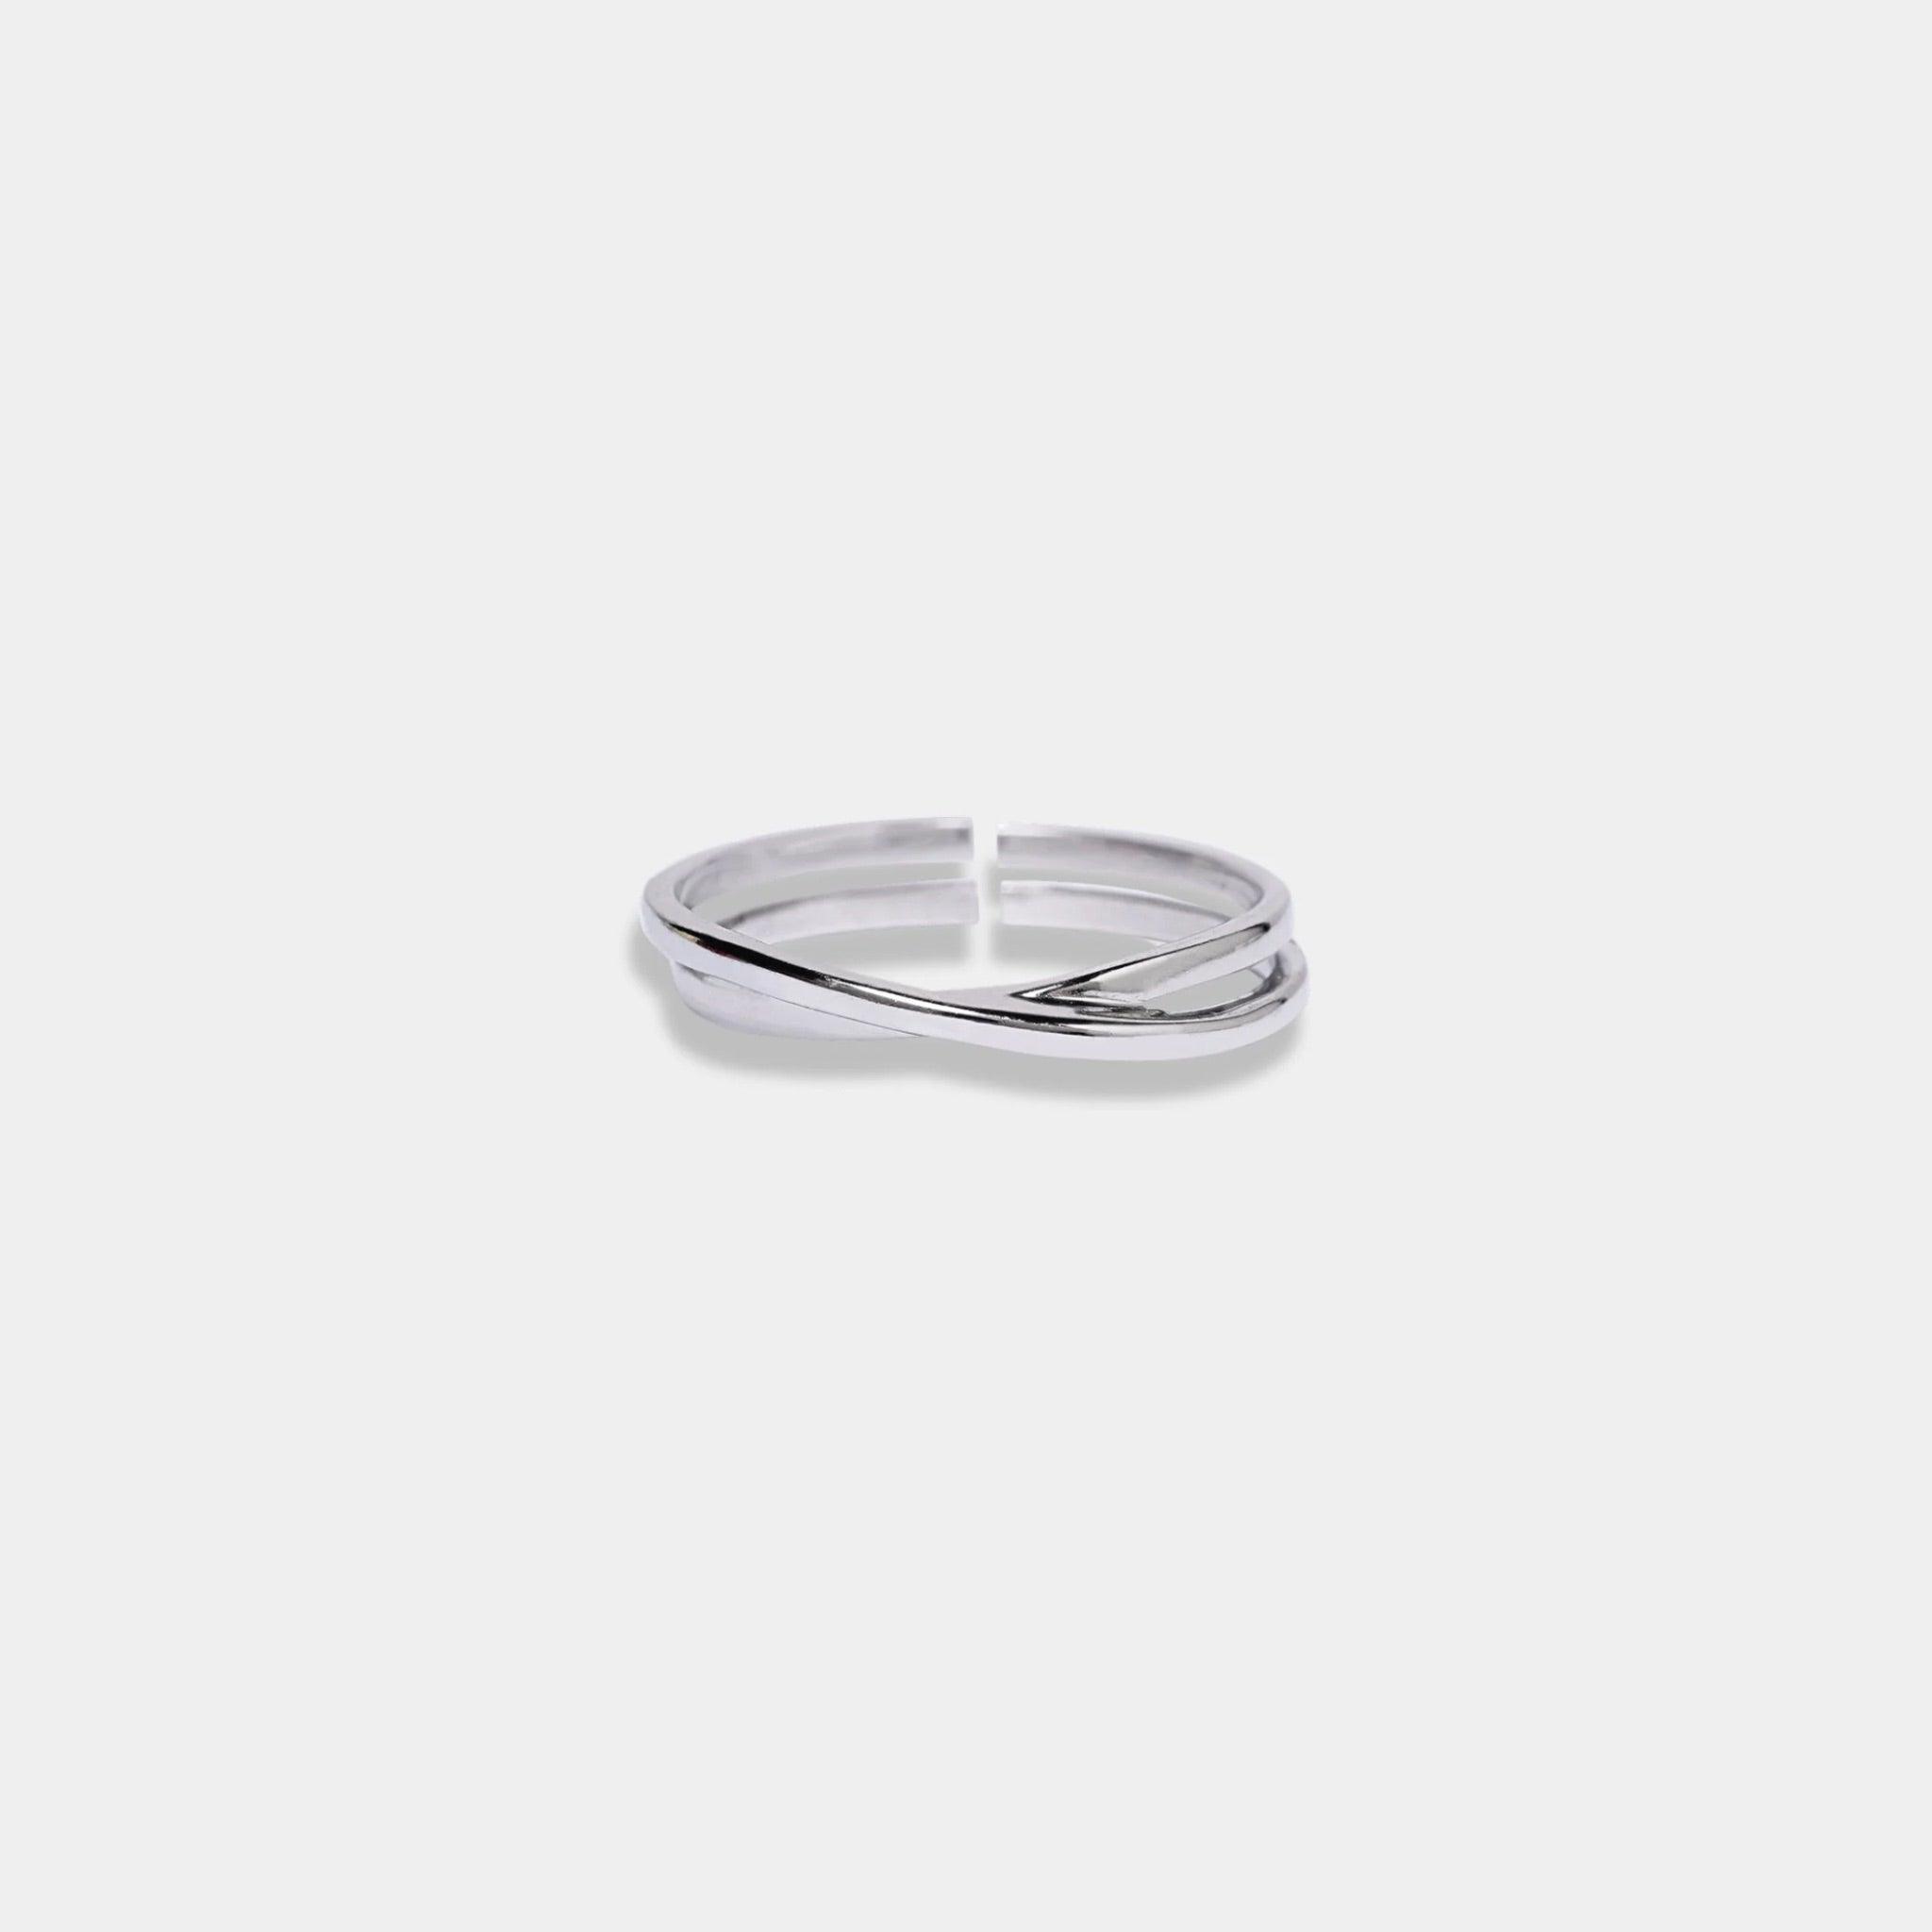  A stylish sterling silver ring with two delicate bands, perfect for adding a touch of elegance to any outfit.